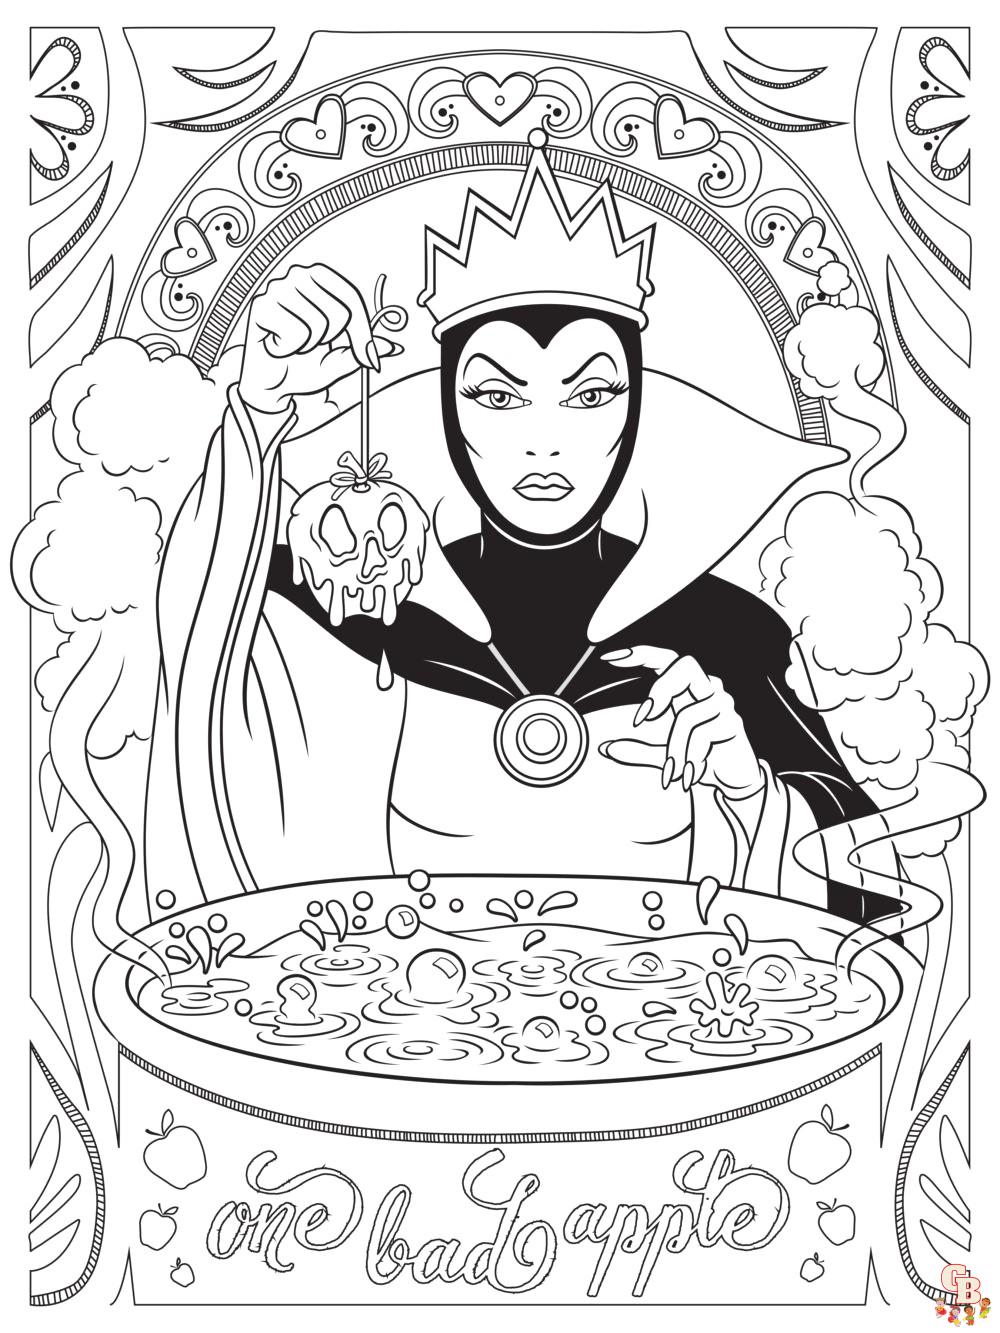 Disney villains coloring pages free printable sheets for kids